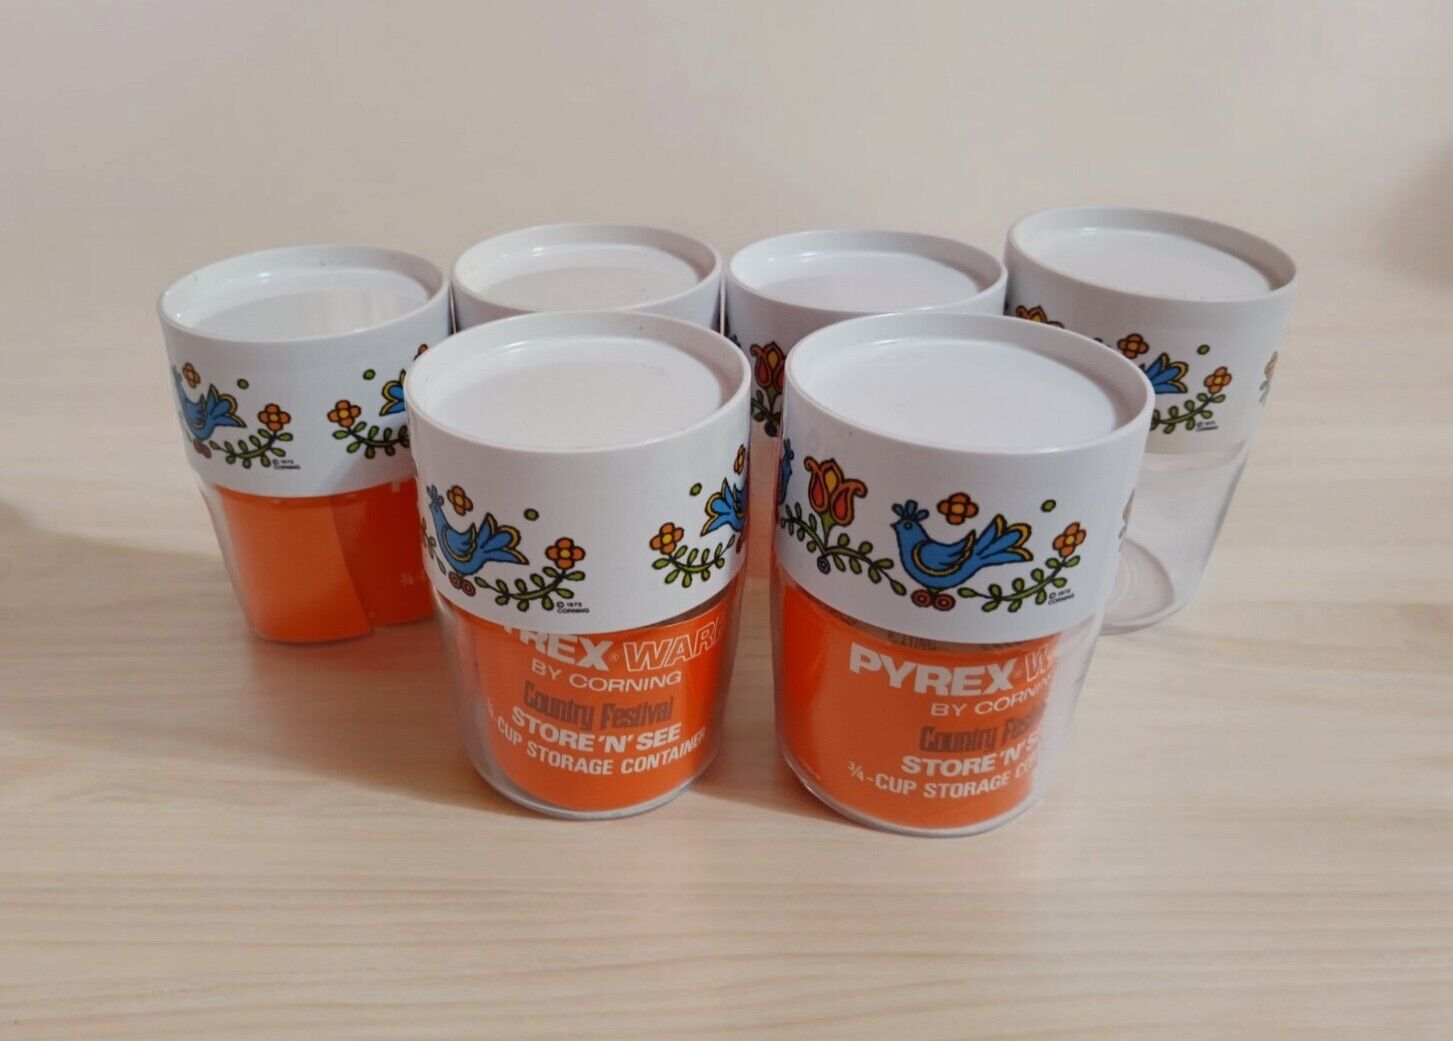 Vintage Pyrex Ware By Corning Containers 1975 Country Festival Store See 3/4 Cup